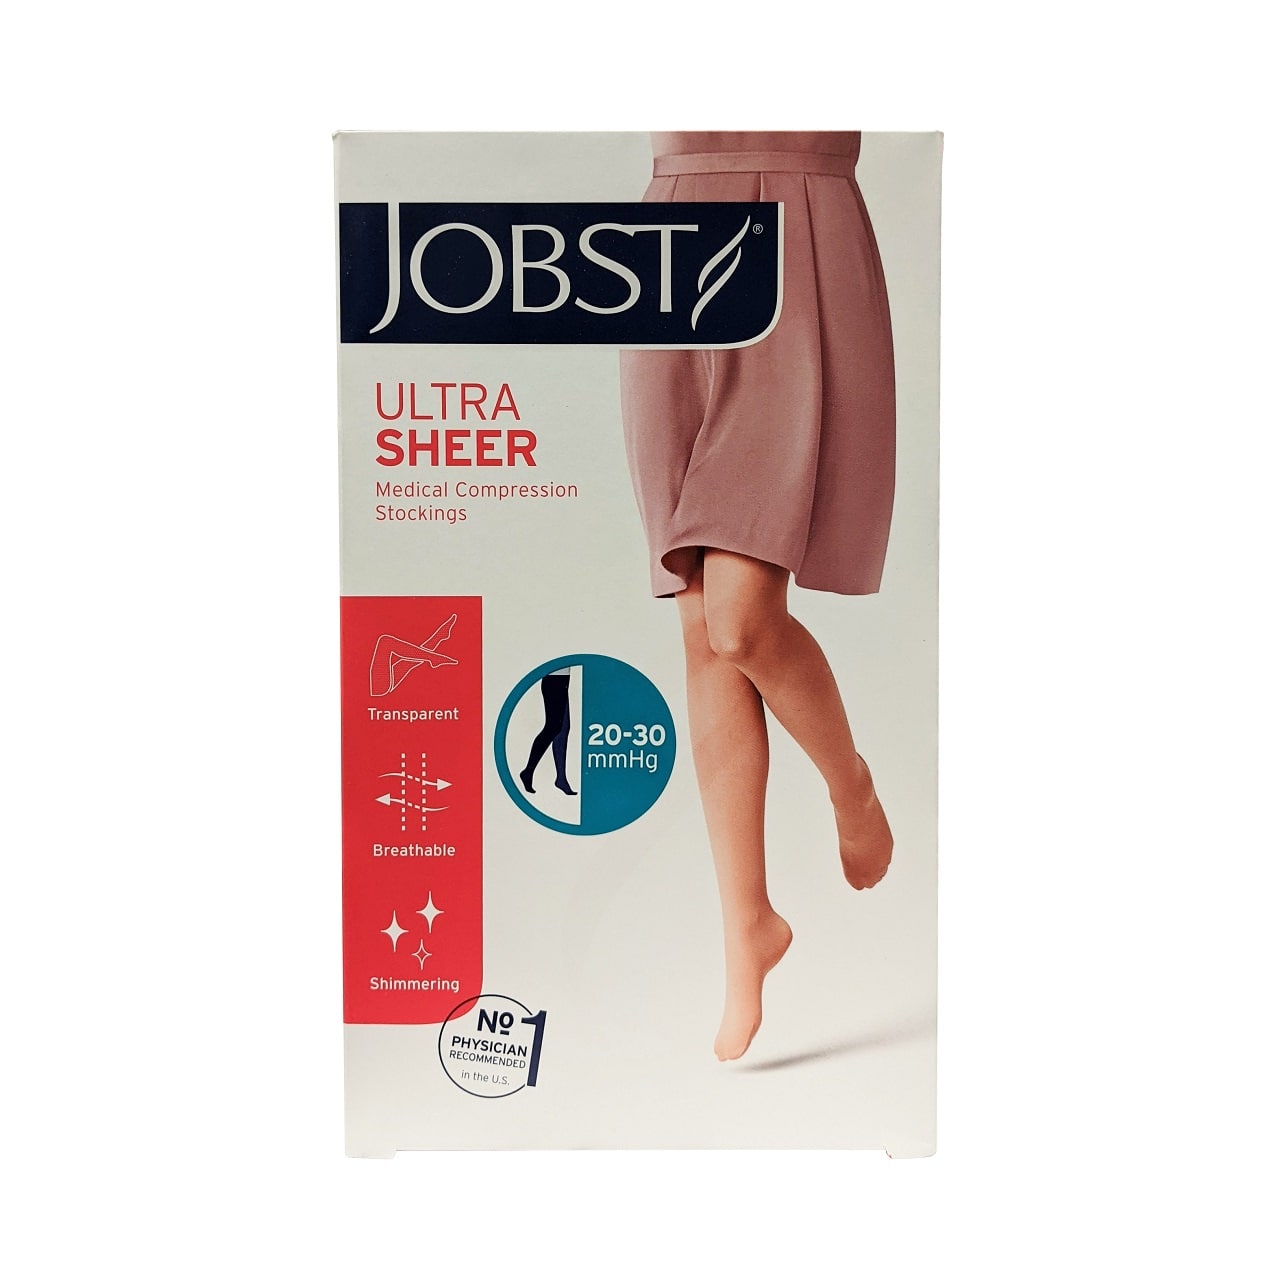 Product label for Jobst UltraSheer Compression Stockings 20-30 mmHg - Pantyhose / Closed Toe / Natural (Medium)